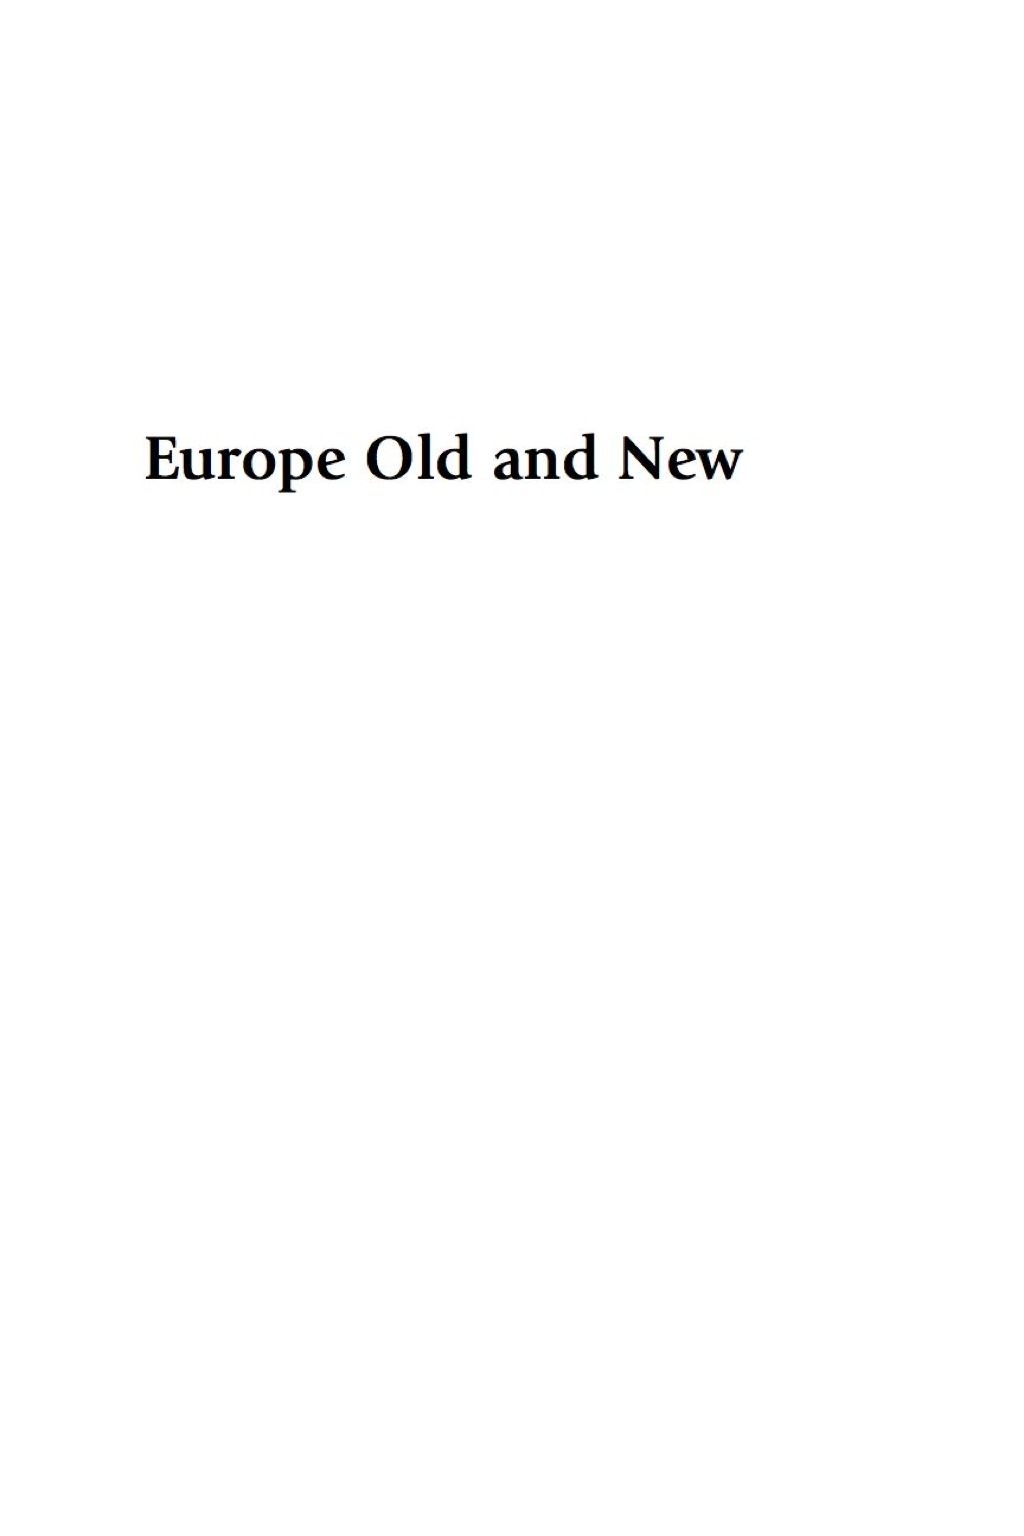 Europe Old and New (eBook Rental) - Ray Taras,